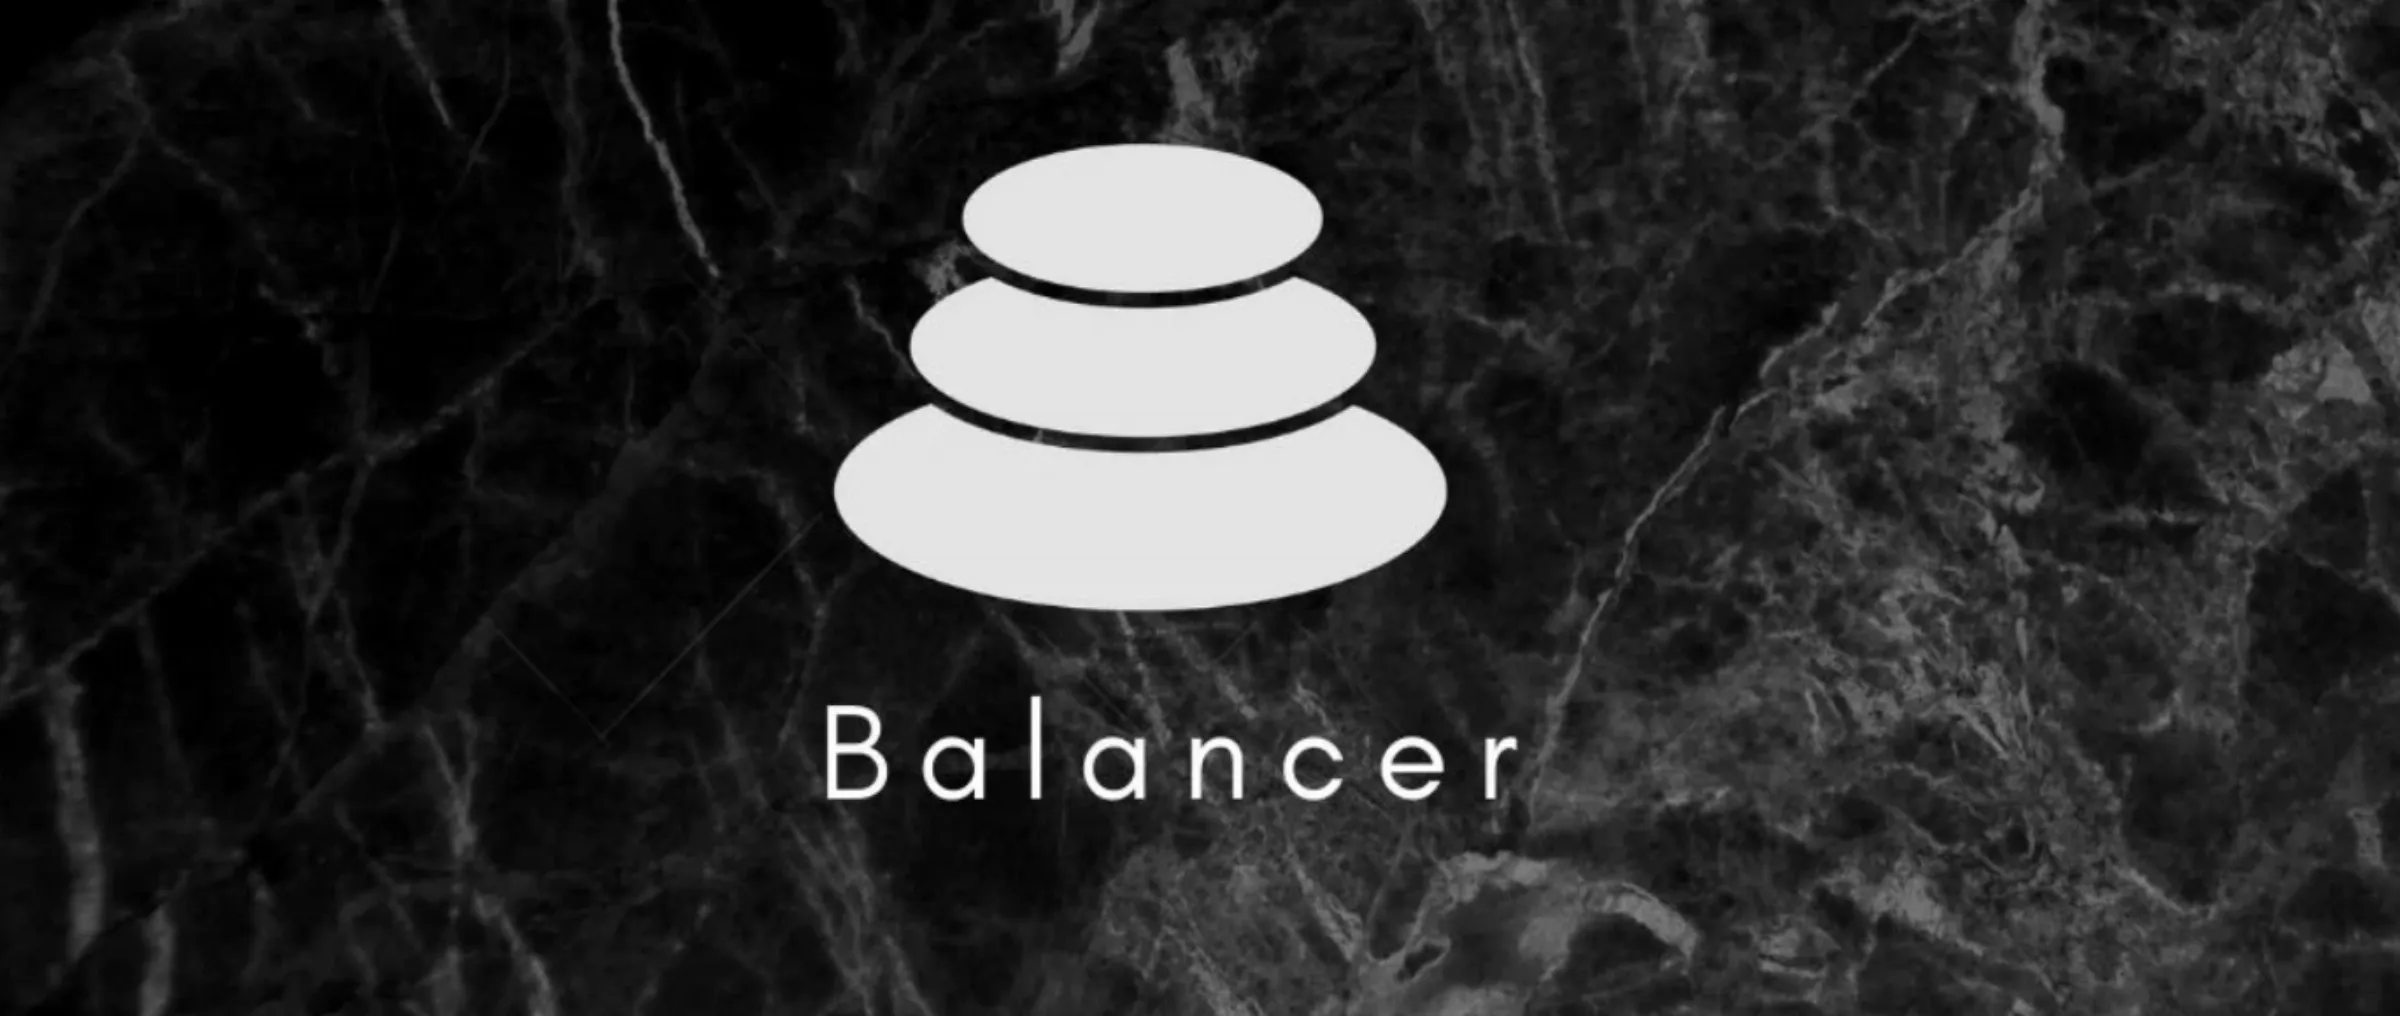 Balancer Makes a Significant Move by Deploying on Avalanche